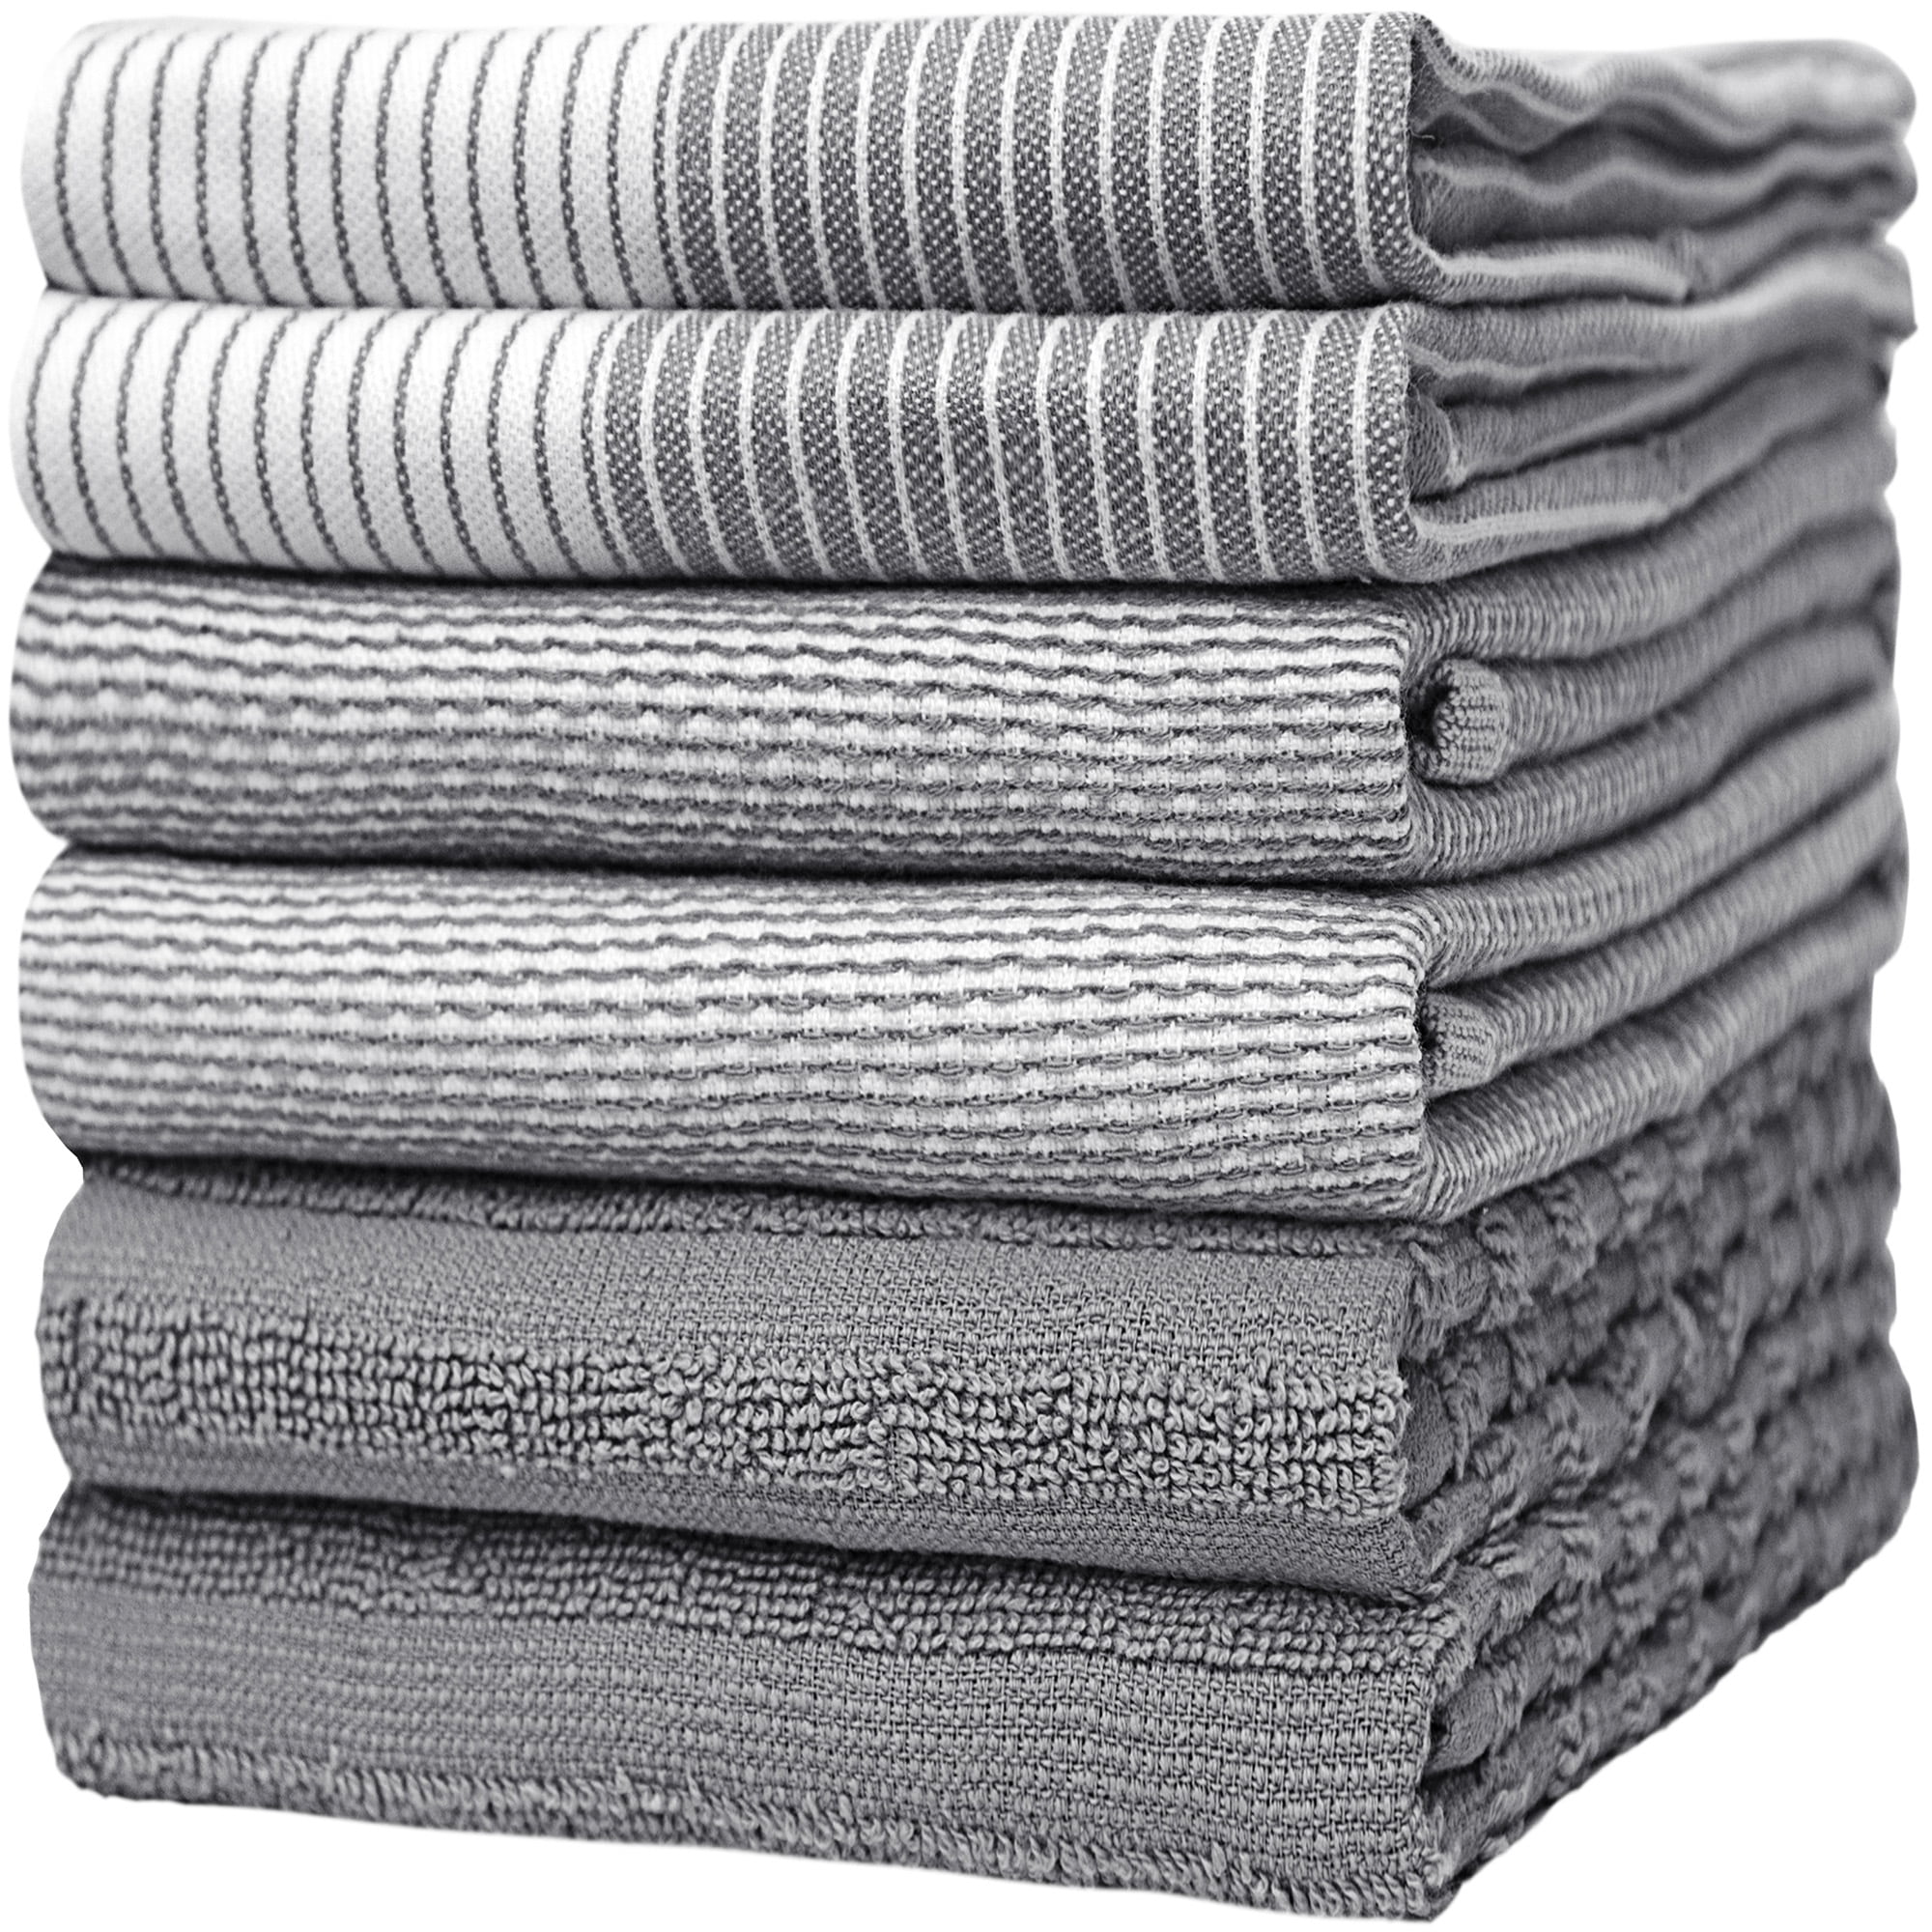 Heavy Duty Oversized Kitchen Towels & Dishcloth (Set of 6 Charcoal 18x28)  Highly Absorbent, Professional Grade Cotton Tea Towels for Everyday Cooking